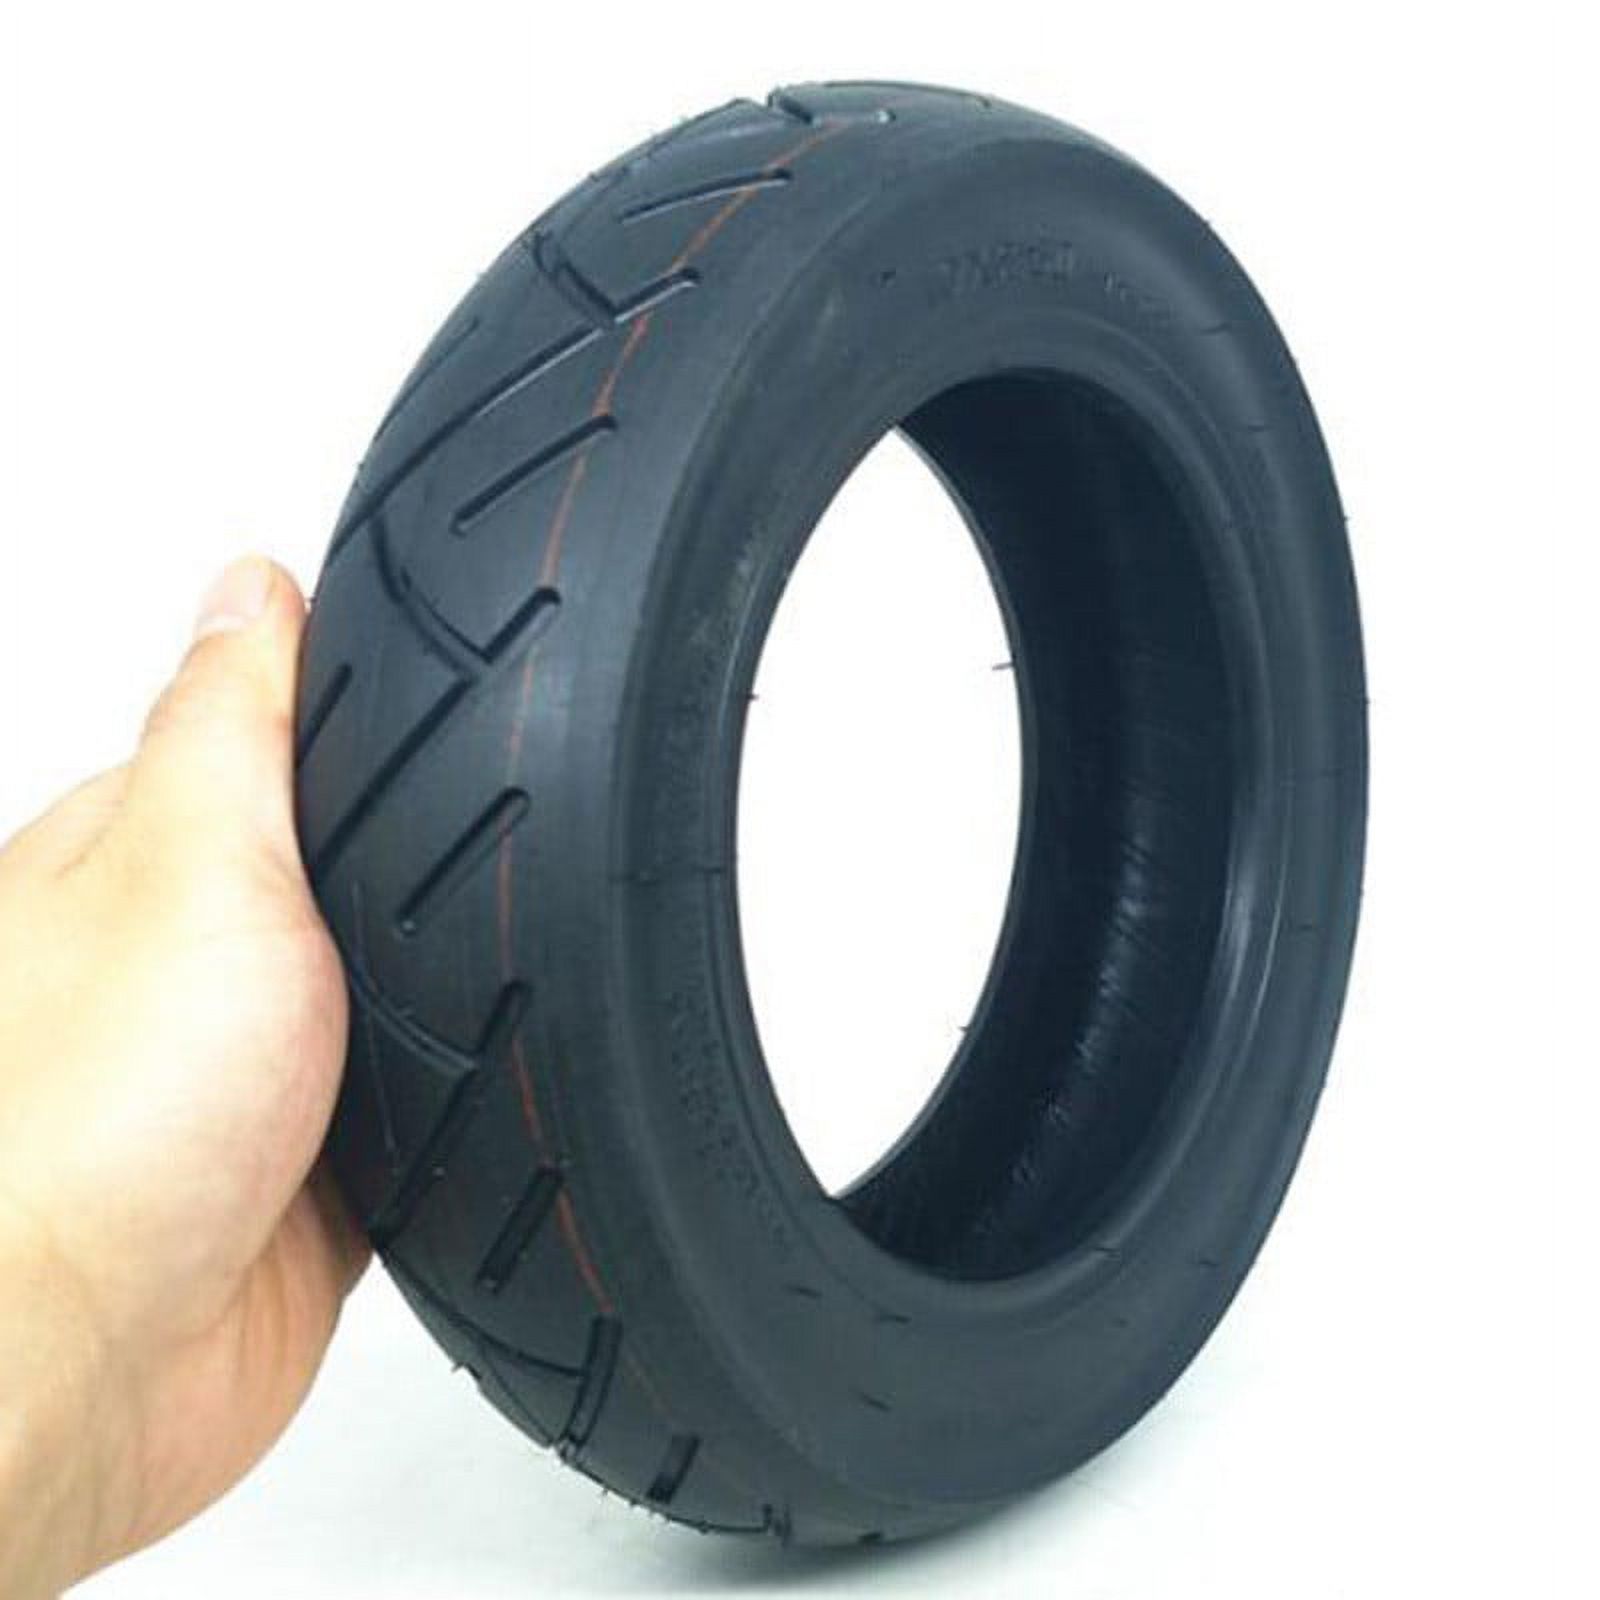 Electric Scooter Tire Rubber 10X2.50 Inner Tube Spare Replacement Parts - image 2 of 7